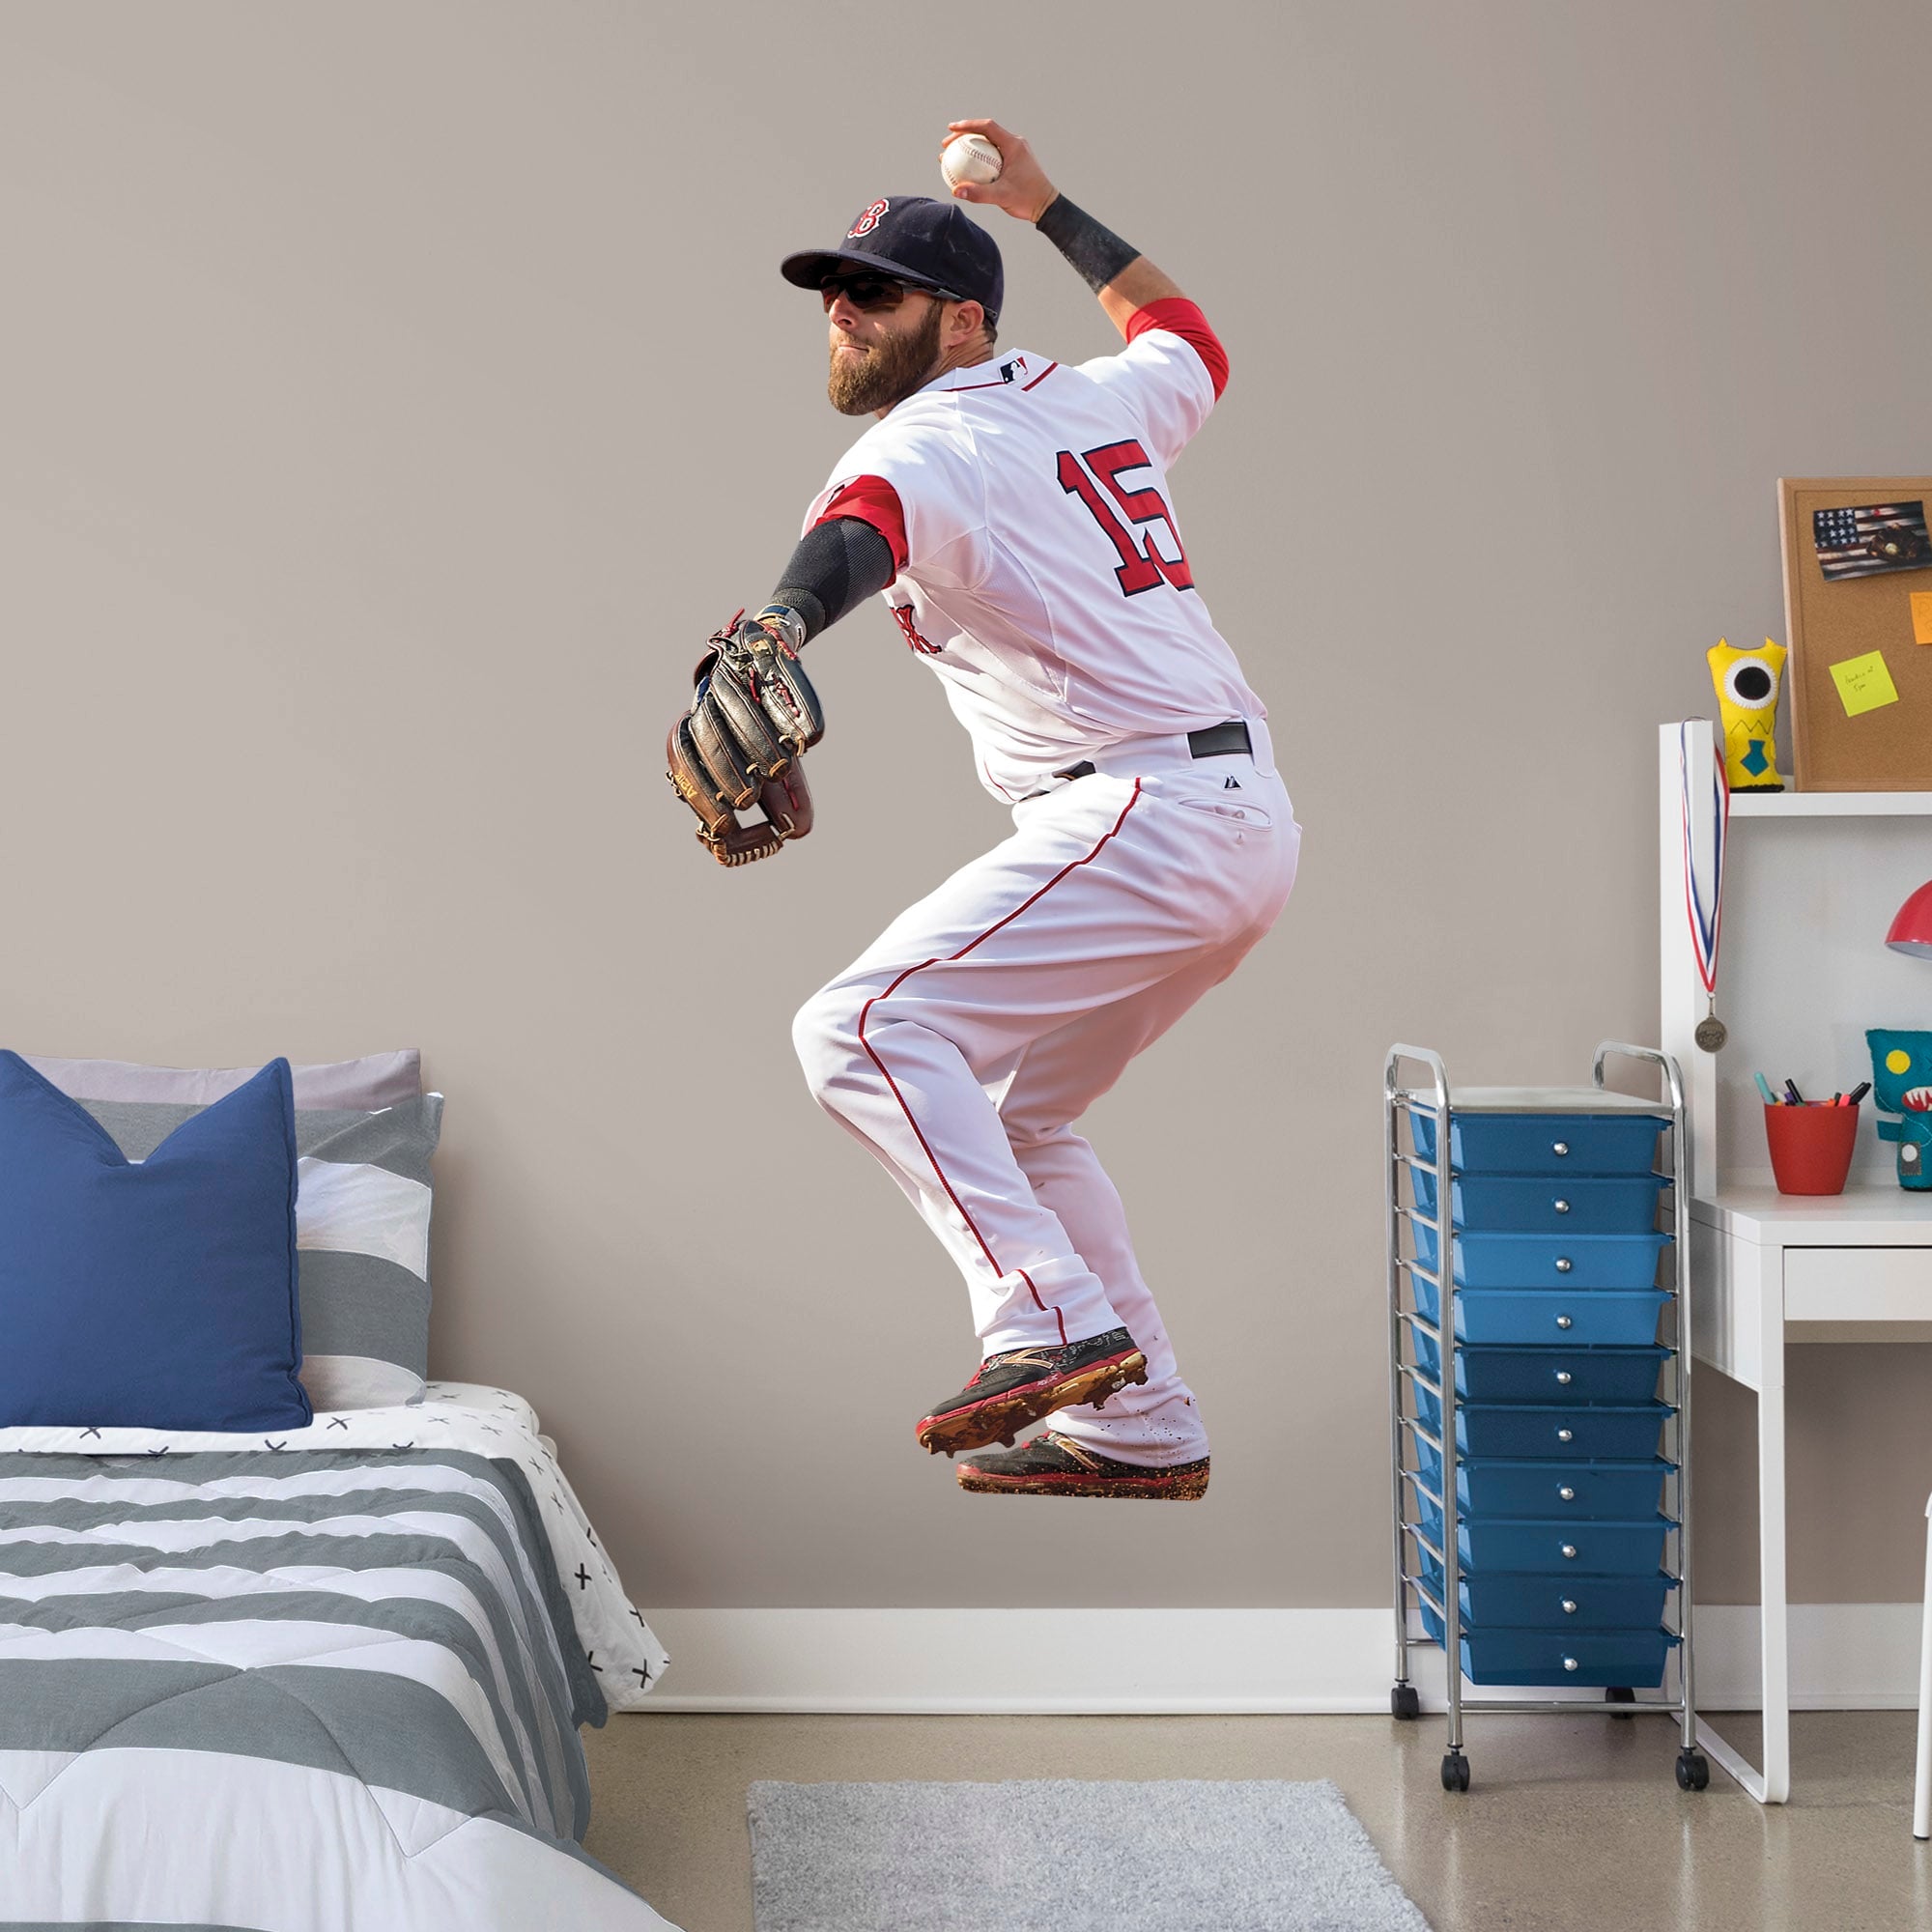 Dustin Pedroia for Boston Red Sox: Throwing - Officially Licensed MLB Removable Wall Decal Life-Size Athlete + 2 Decals (35"W x